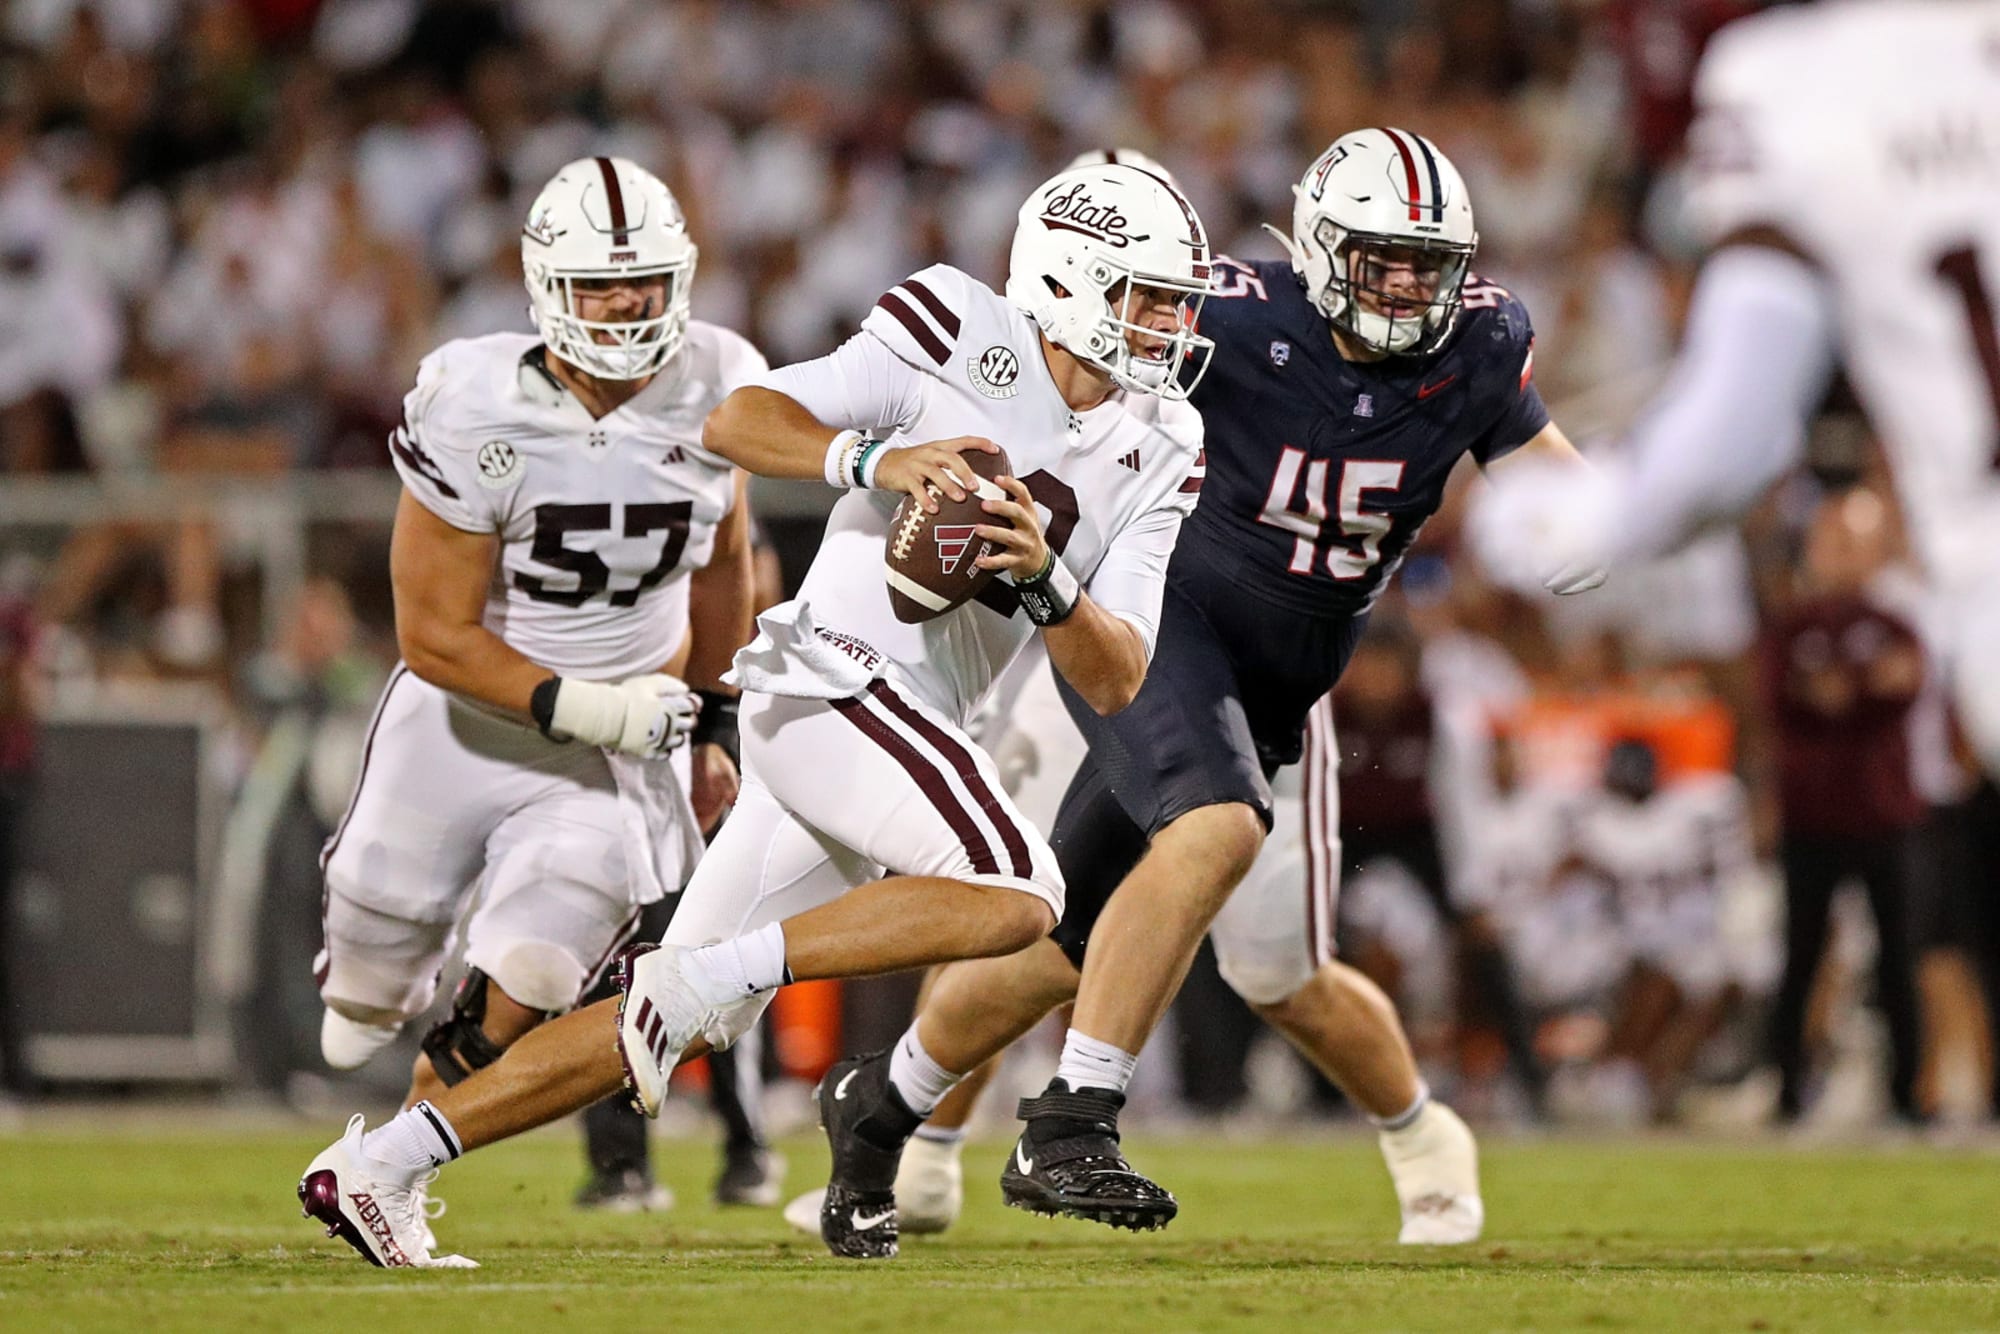 Mississippi State football fans simmering after shocking win over Arizona